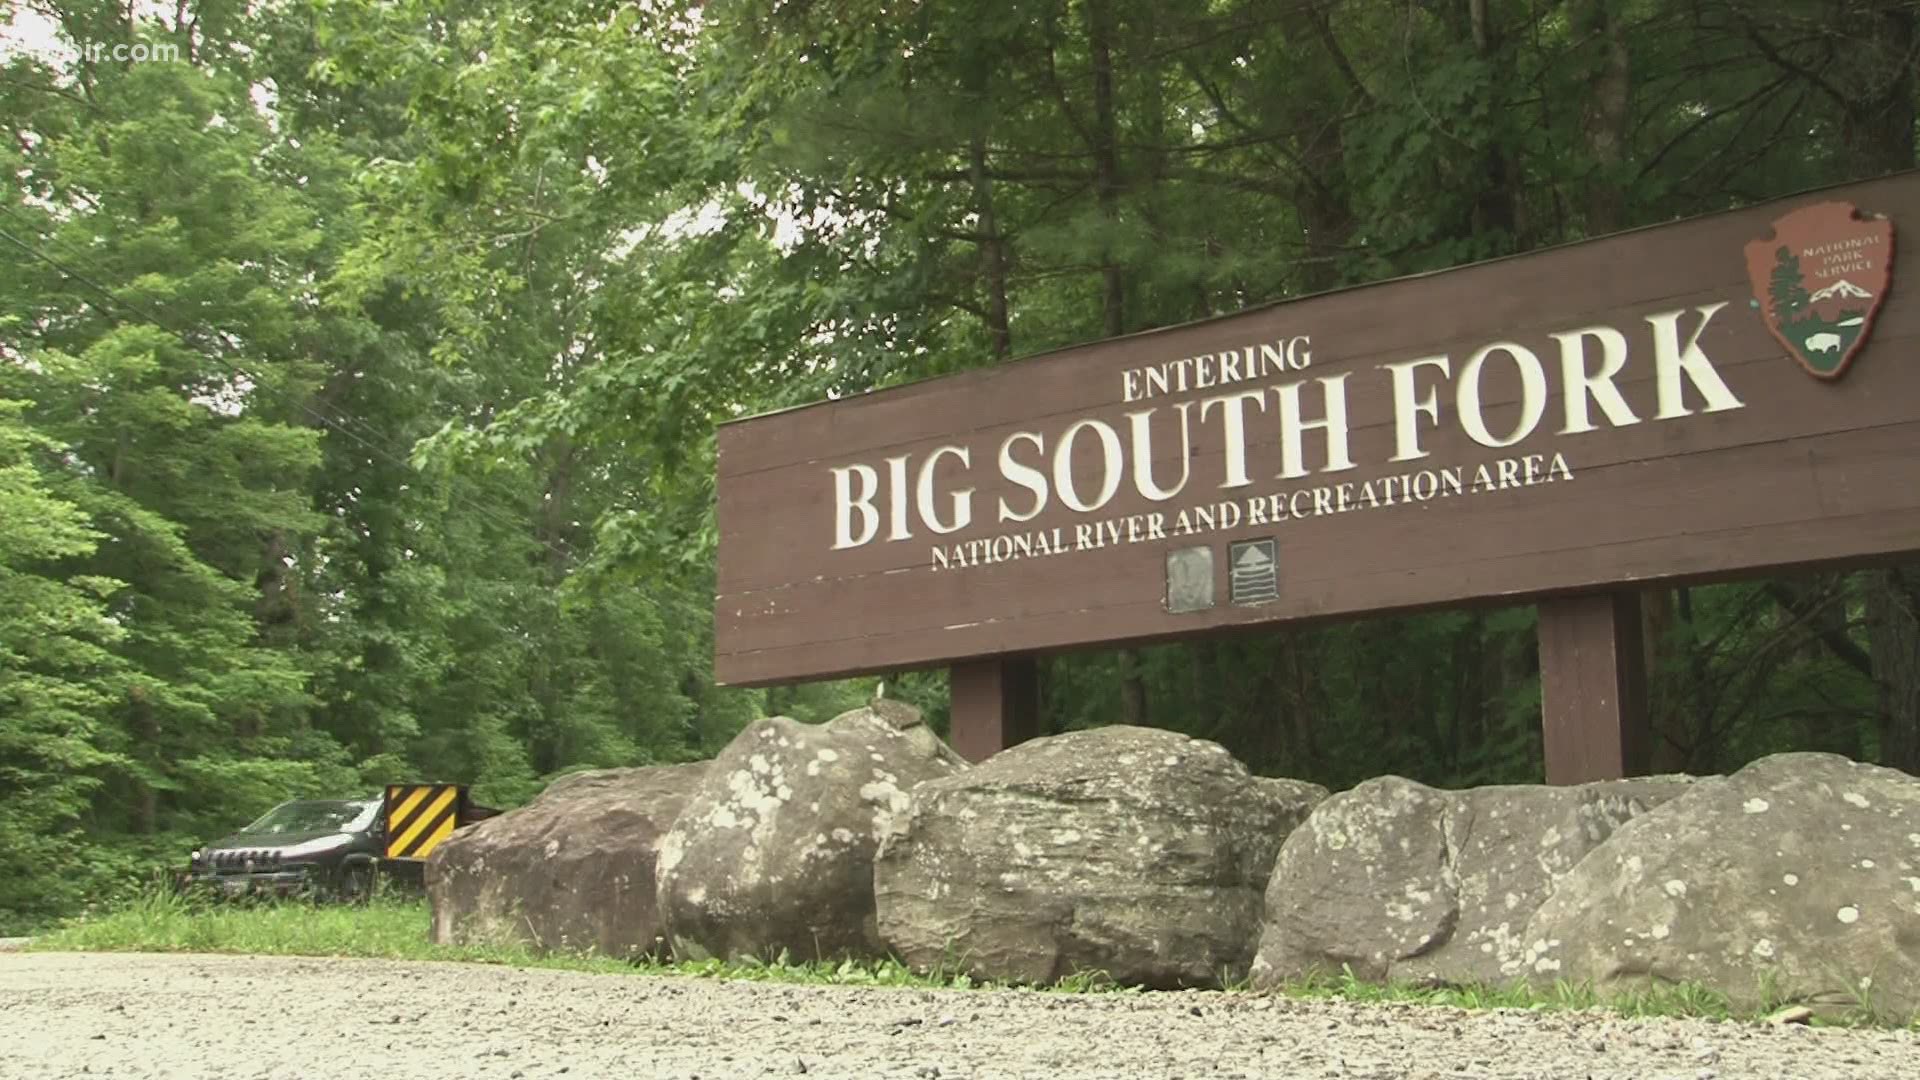 As more people visited the Big South Fork Park, they spend more money in nearby communities and boosted the nearby economy.